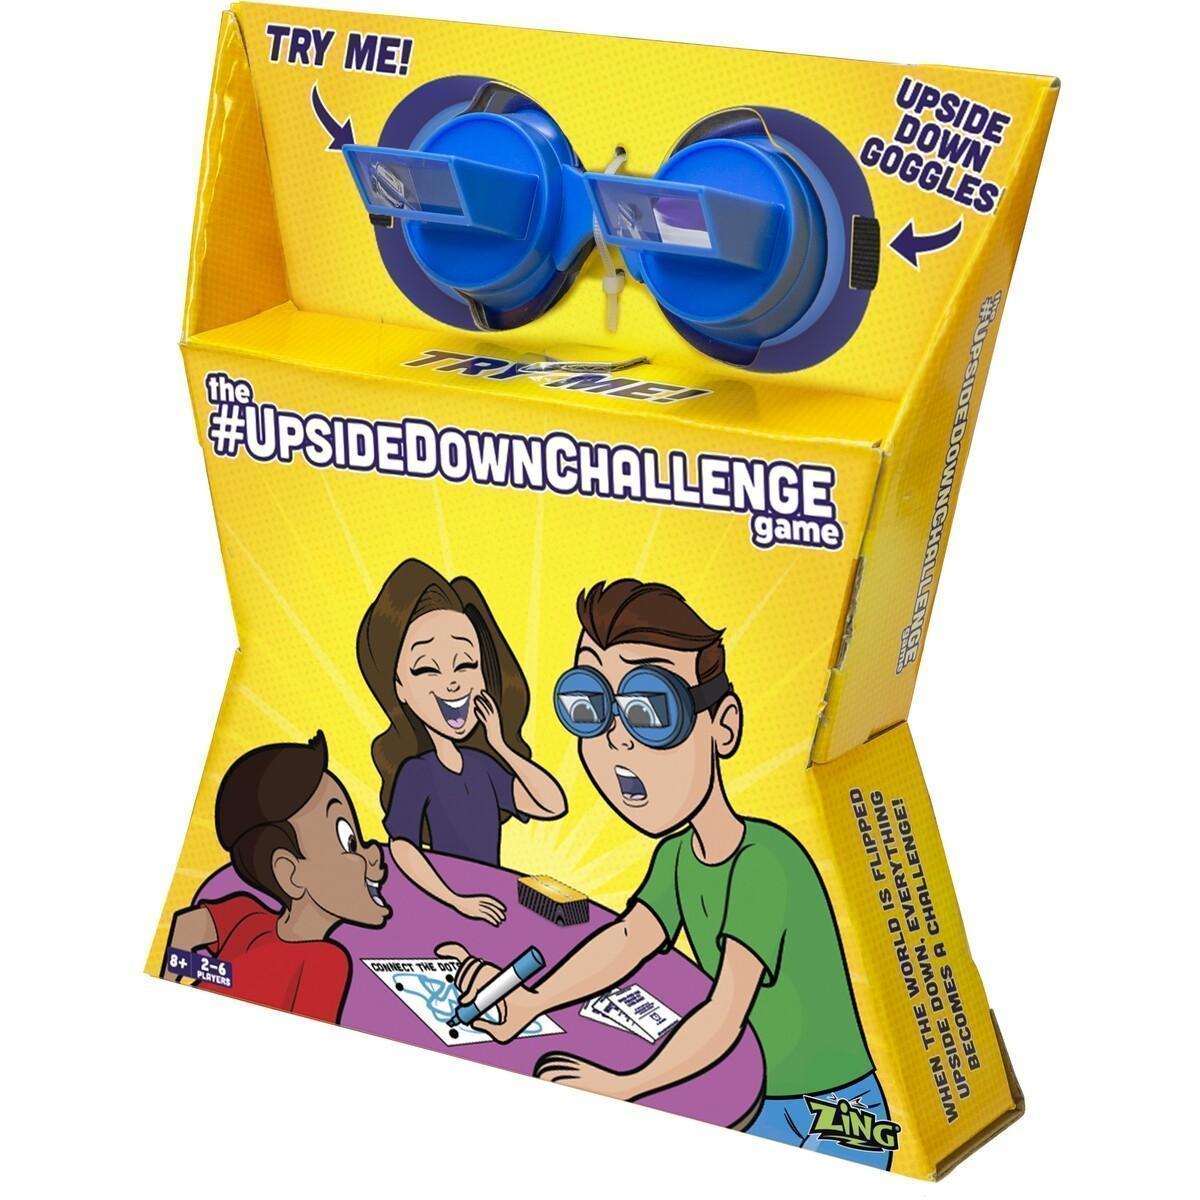 The Upside Down Challenge Family Game With Goggles #UpsideDownChallenge